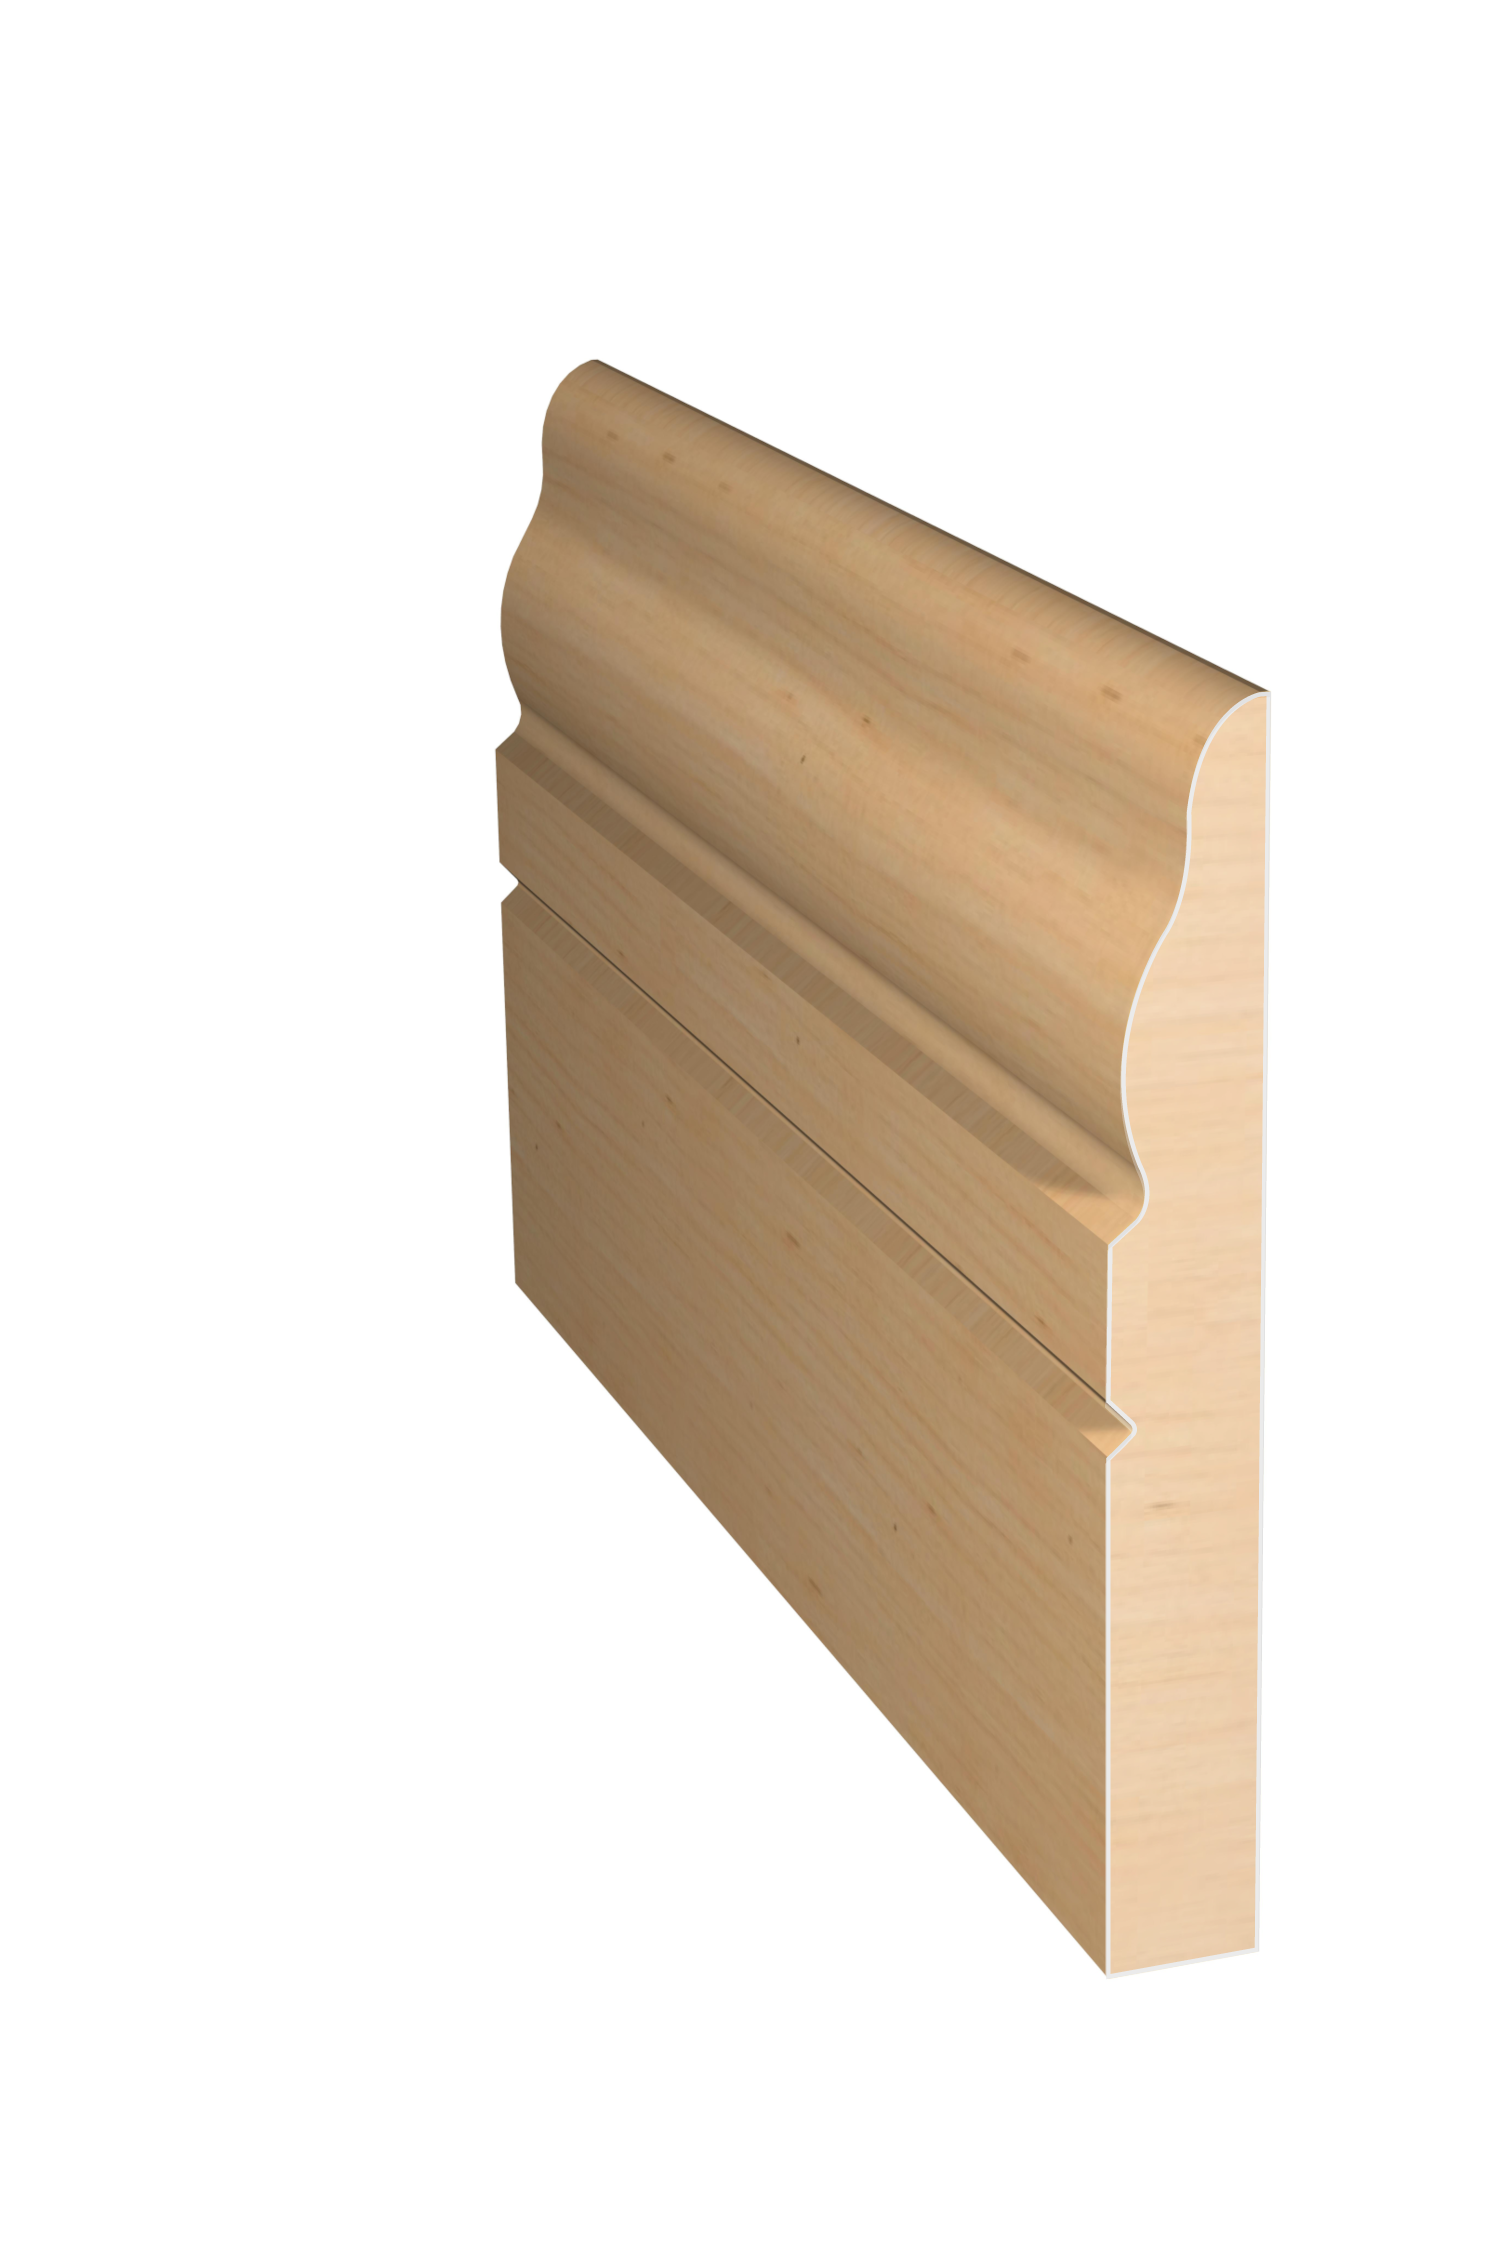 Three dimensional rendering of custom casing wood molding CAPL31235 made by Public Lumber Company in Detroit.